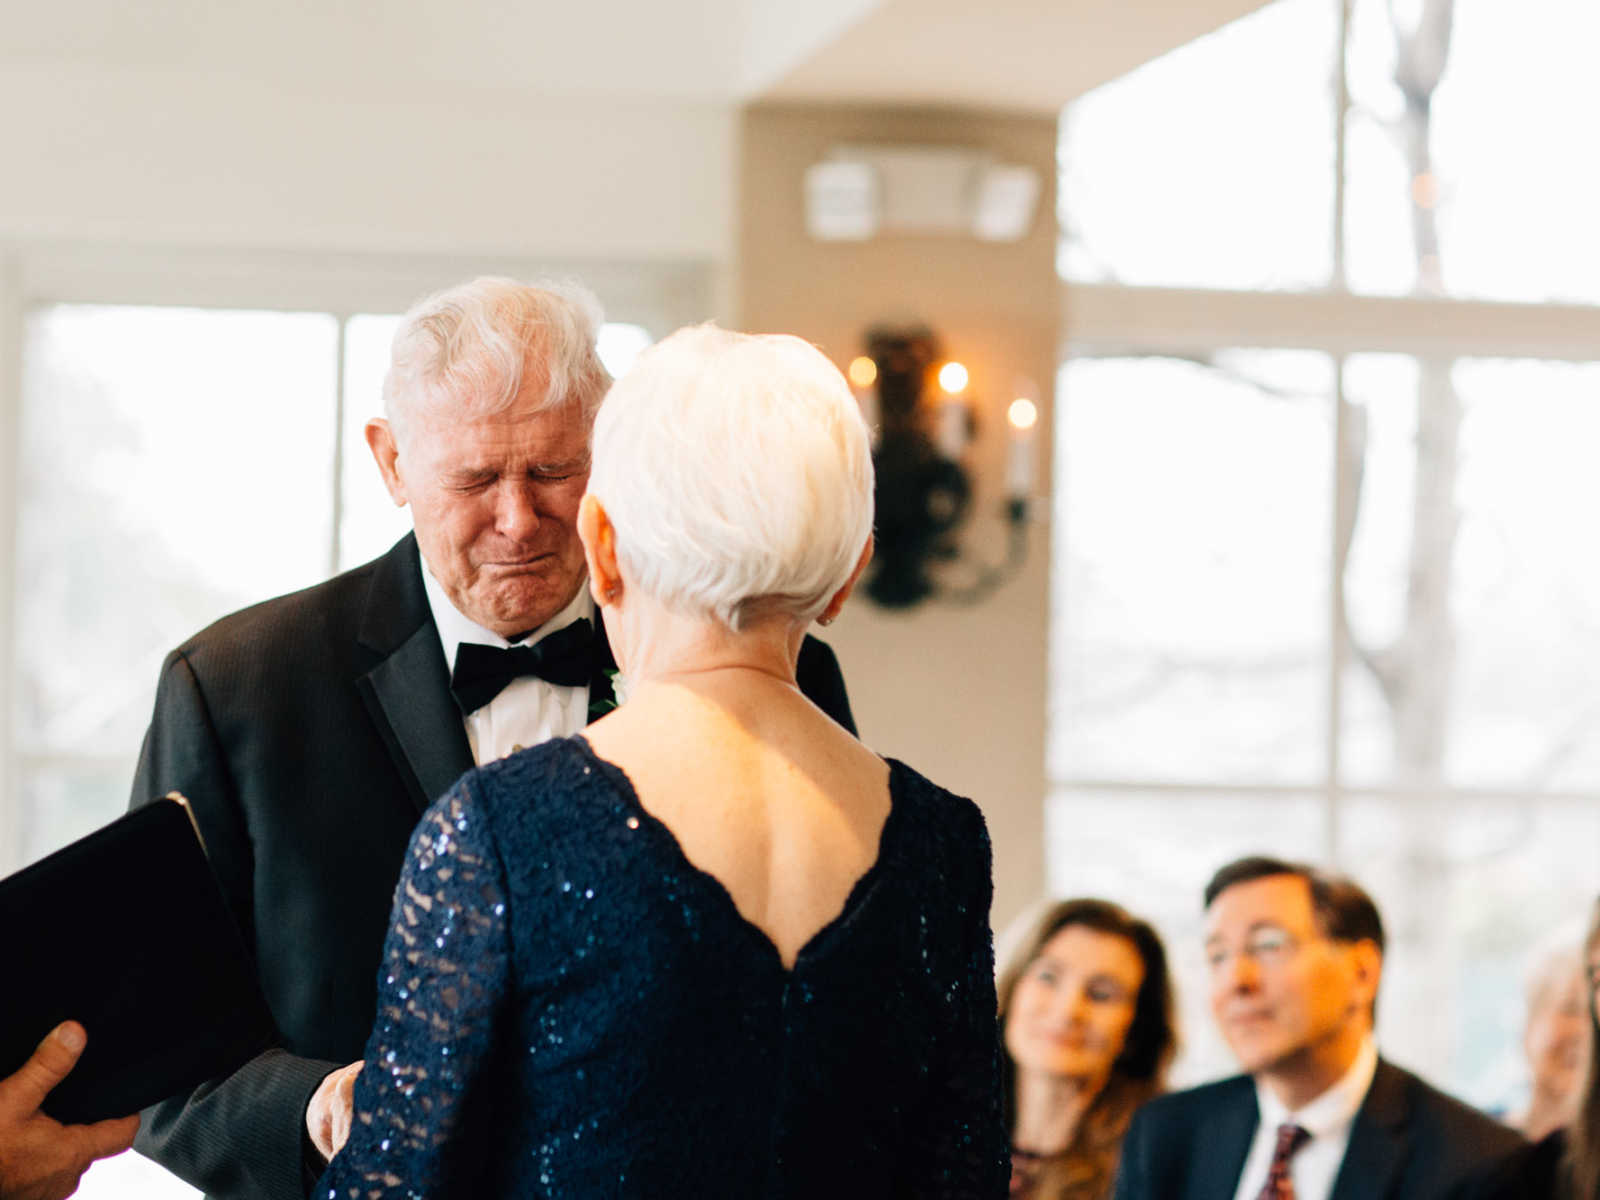 Elderly groom cries while hand in hand with 77 year old bride during ceremony